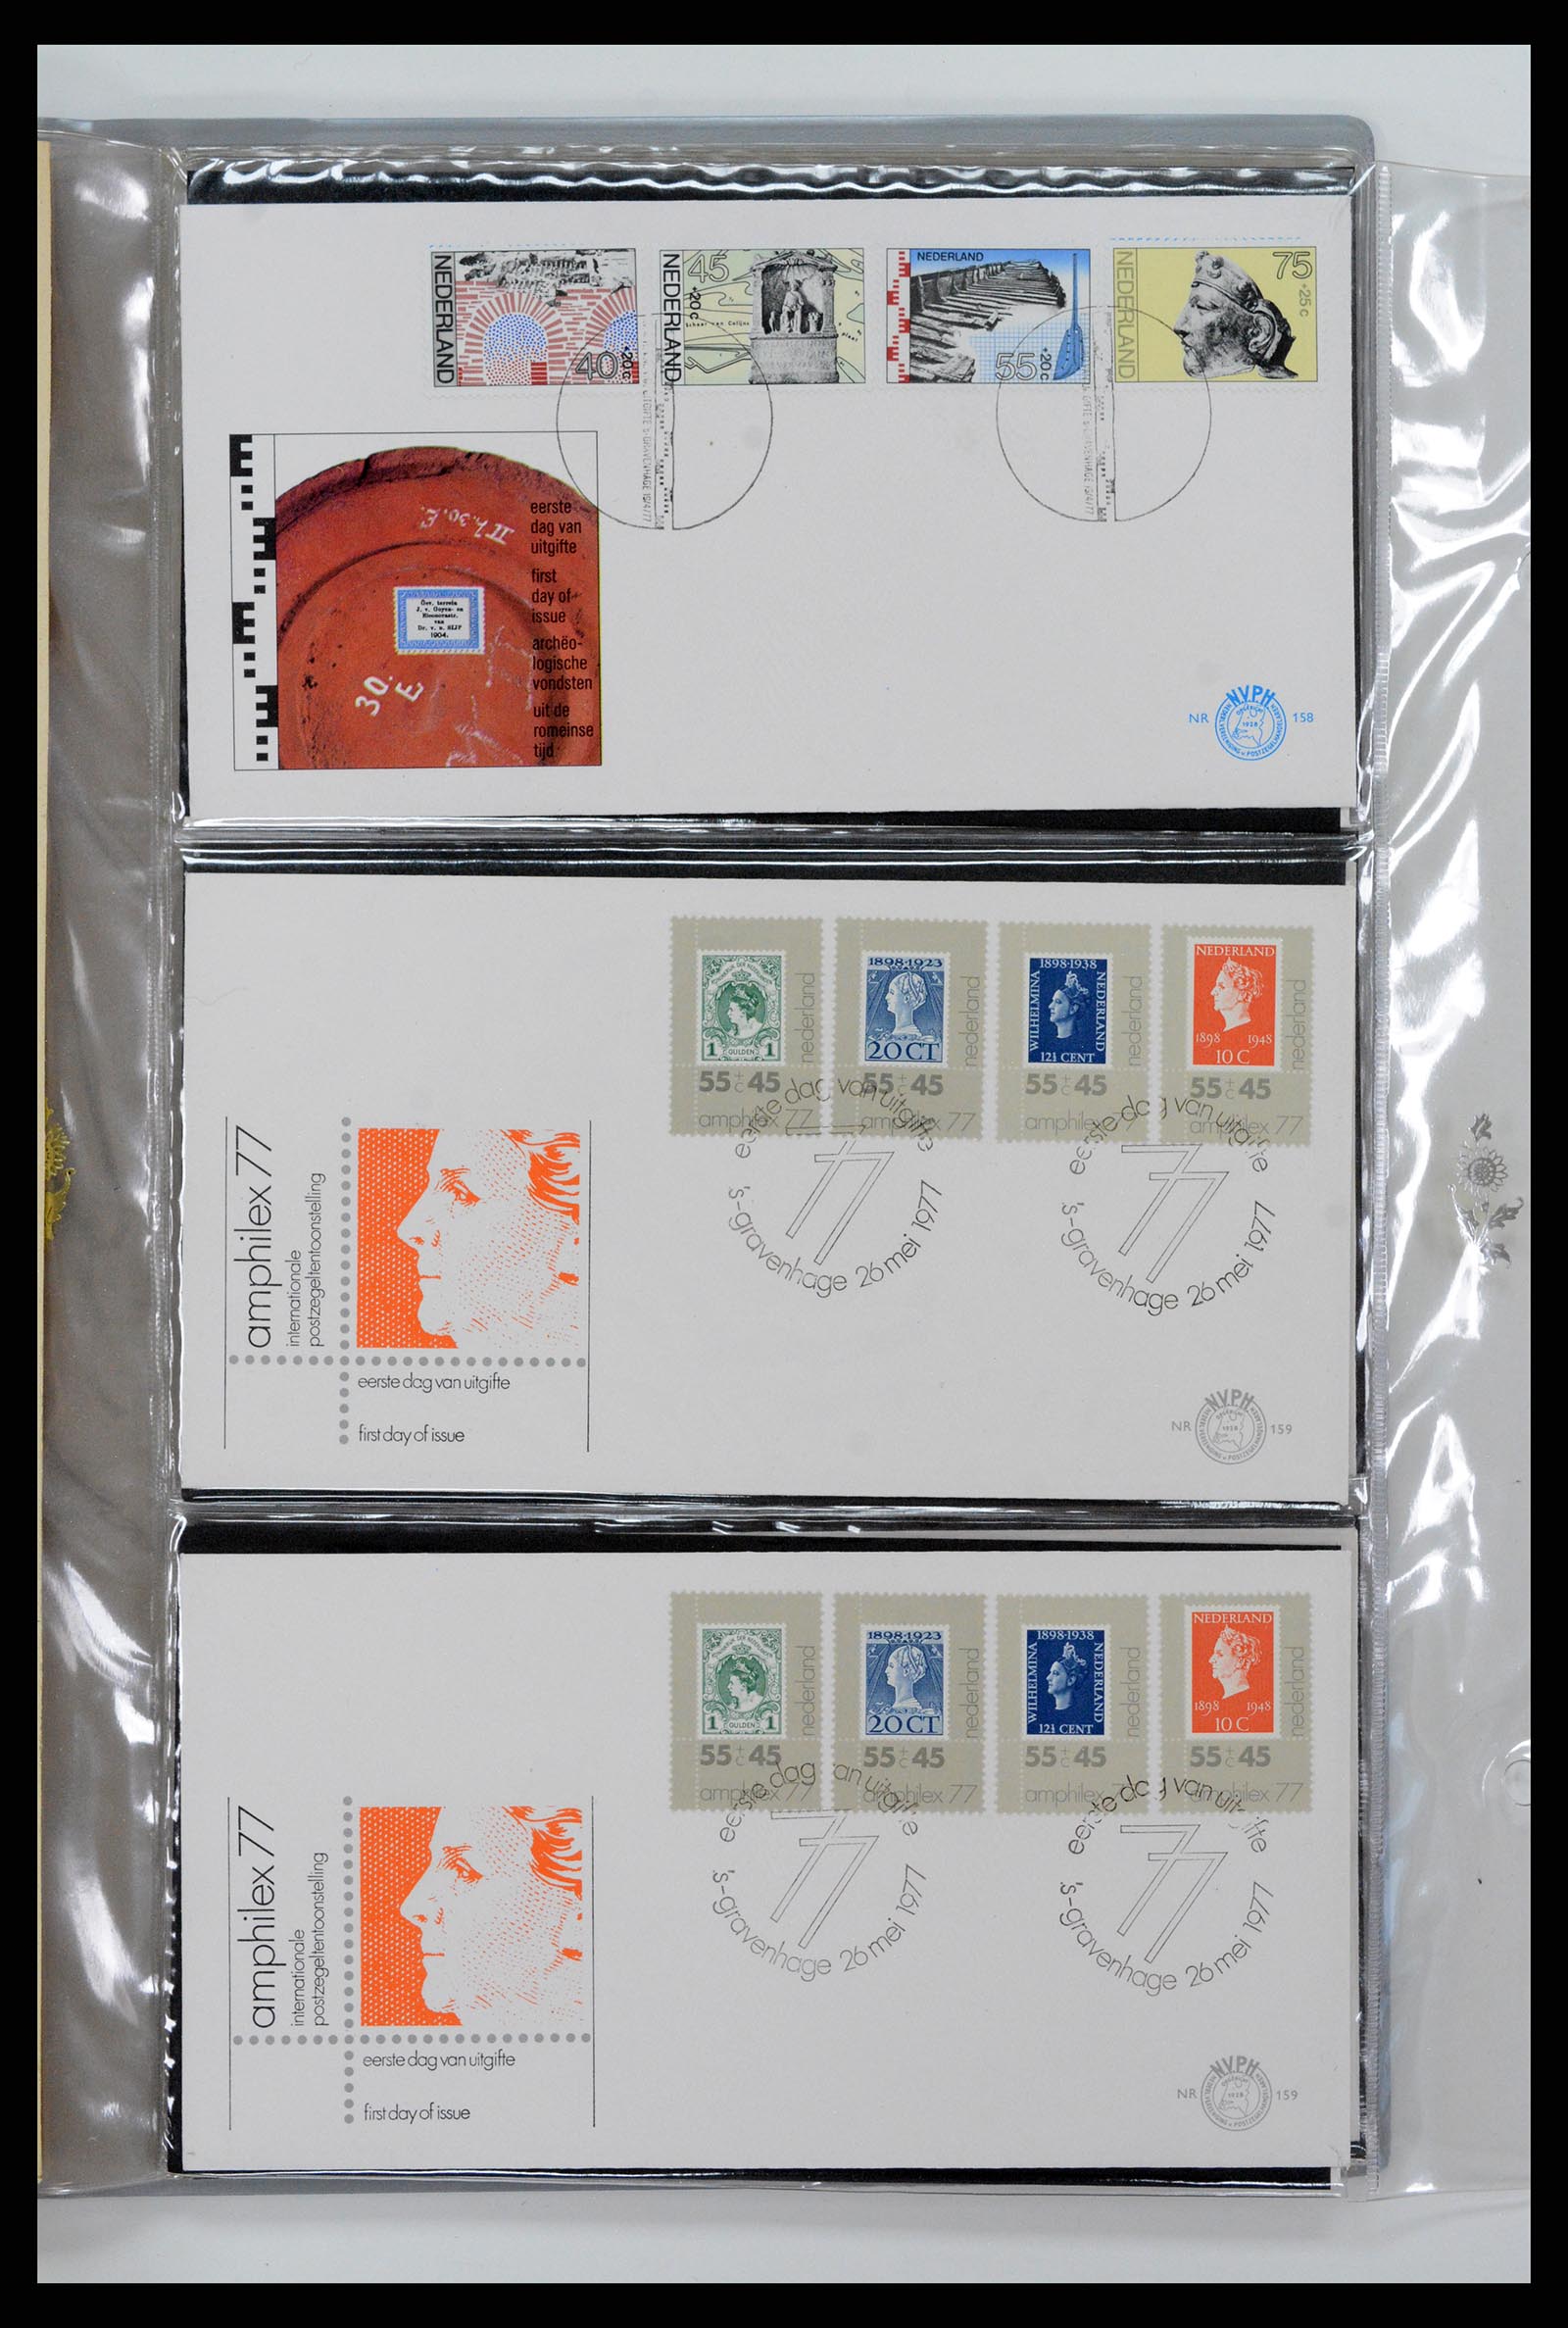 37461 058 - Stamp collection 37461 Netherlands FDC's 1950-2014.